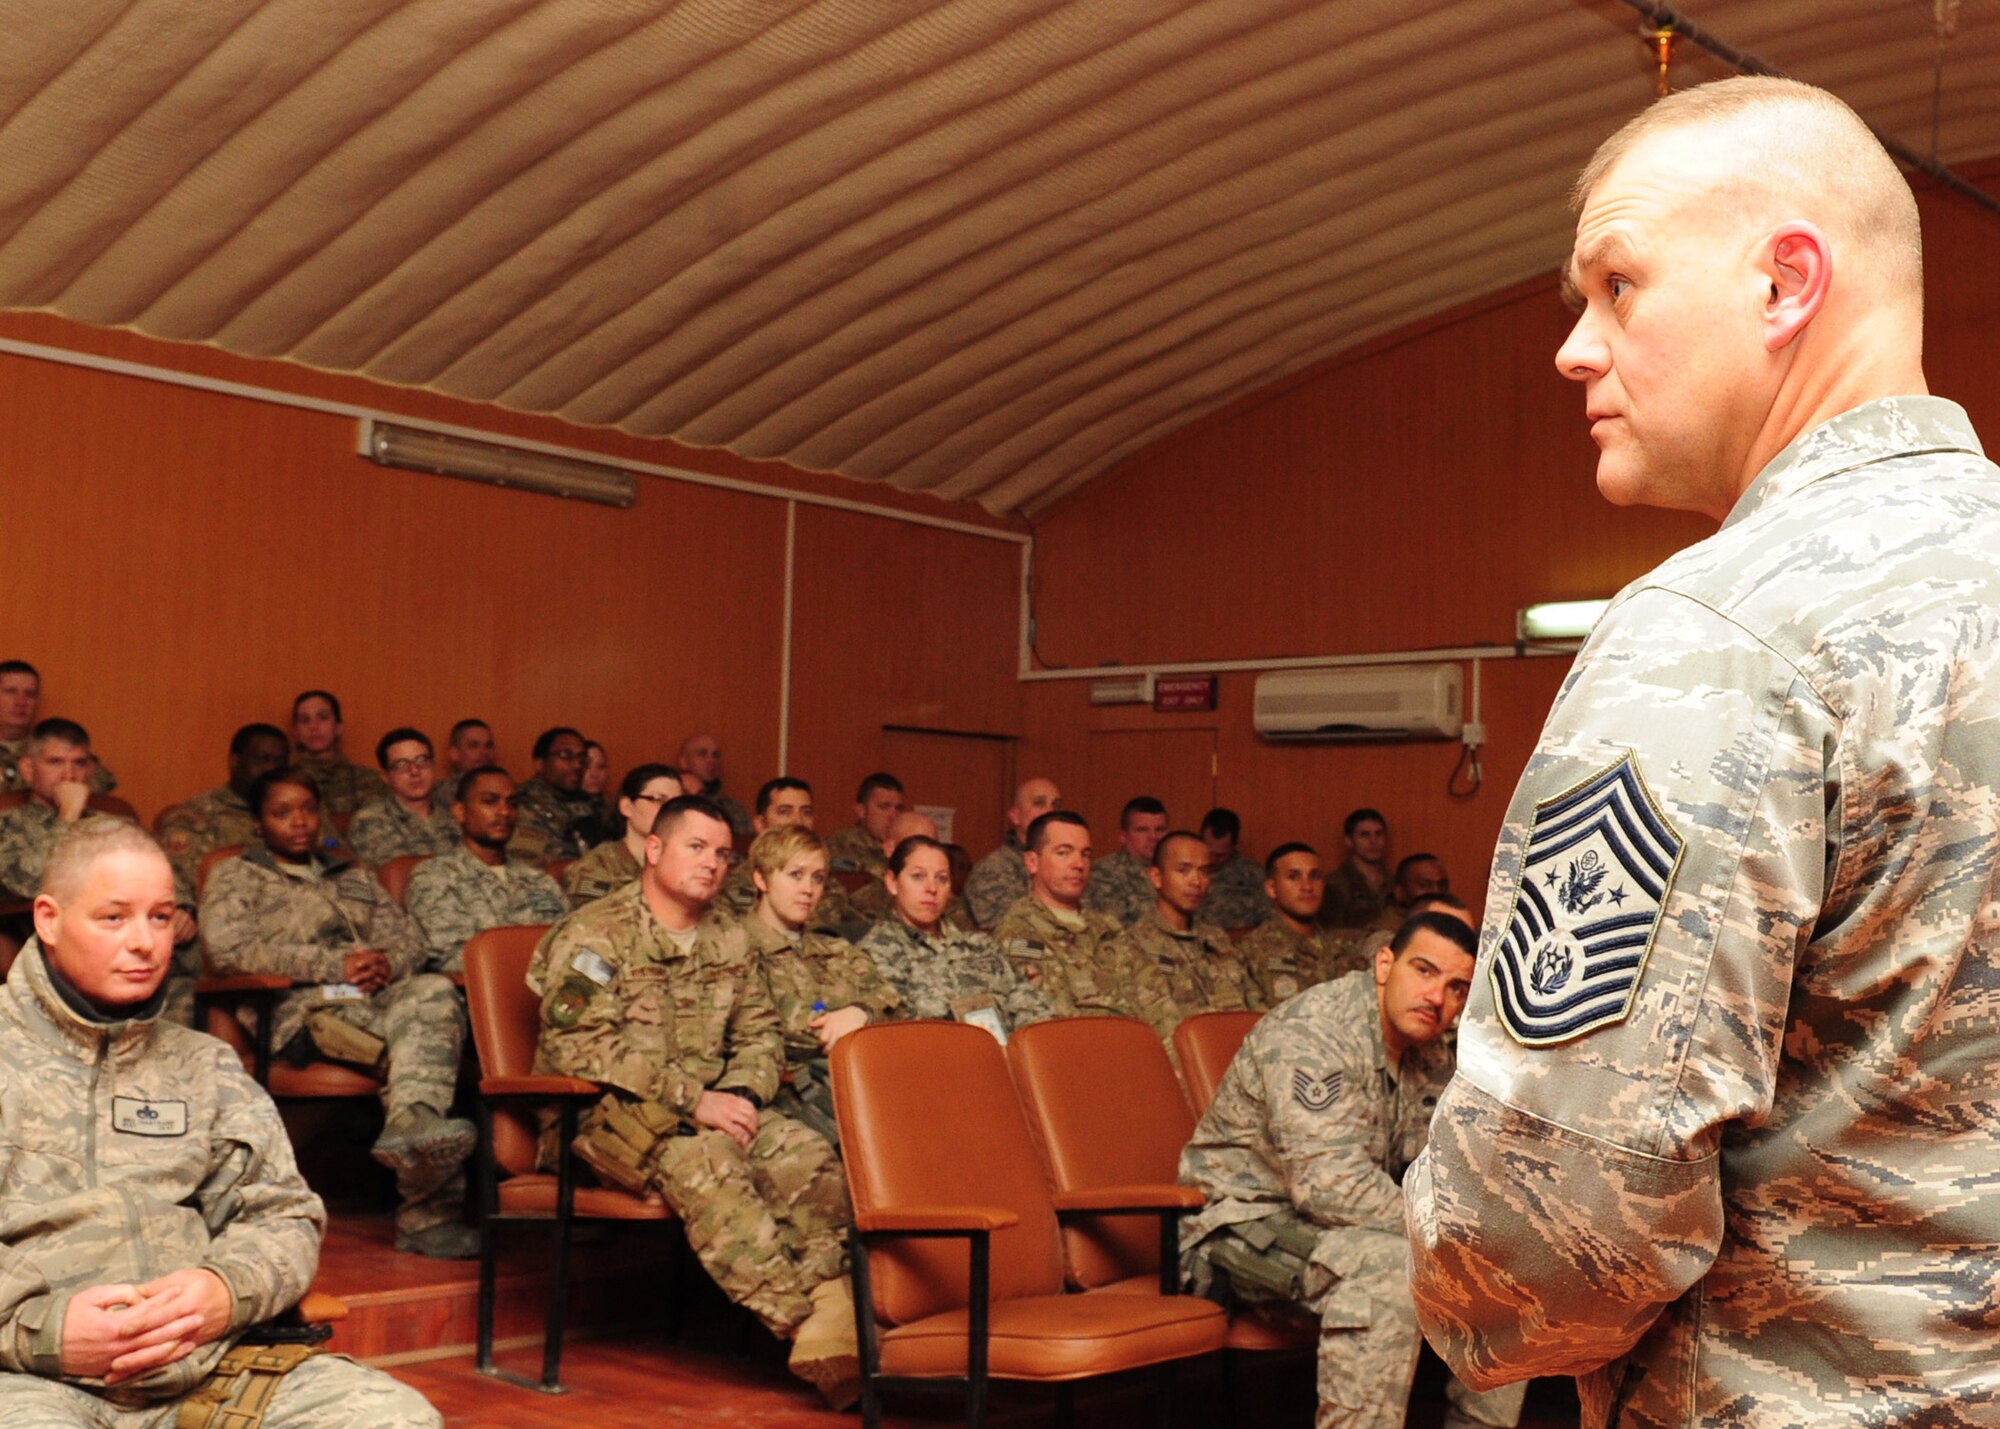 Members from the 438th Air Expeditionary Wing met with Chief Master Sgt. of the Air Force James A. Roy at Kabul International Airport, Afghanistan, Feb. 1, 2012. Roy discussed resiliency, leadership, budget cuts and educational benefits. (U.S. Air Force photo/Staff Sgt. Nadine Y. Barclay)